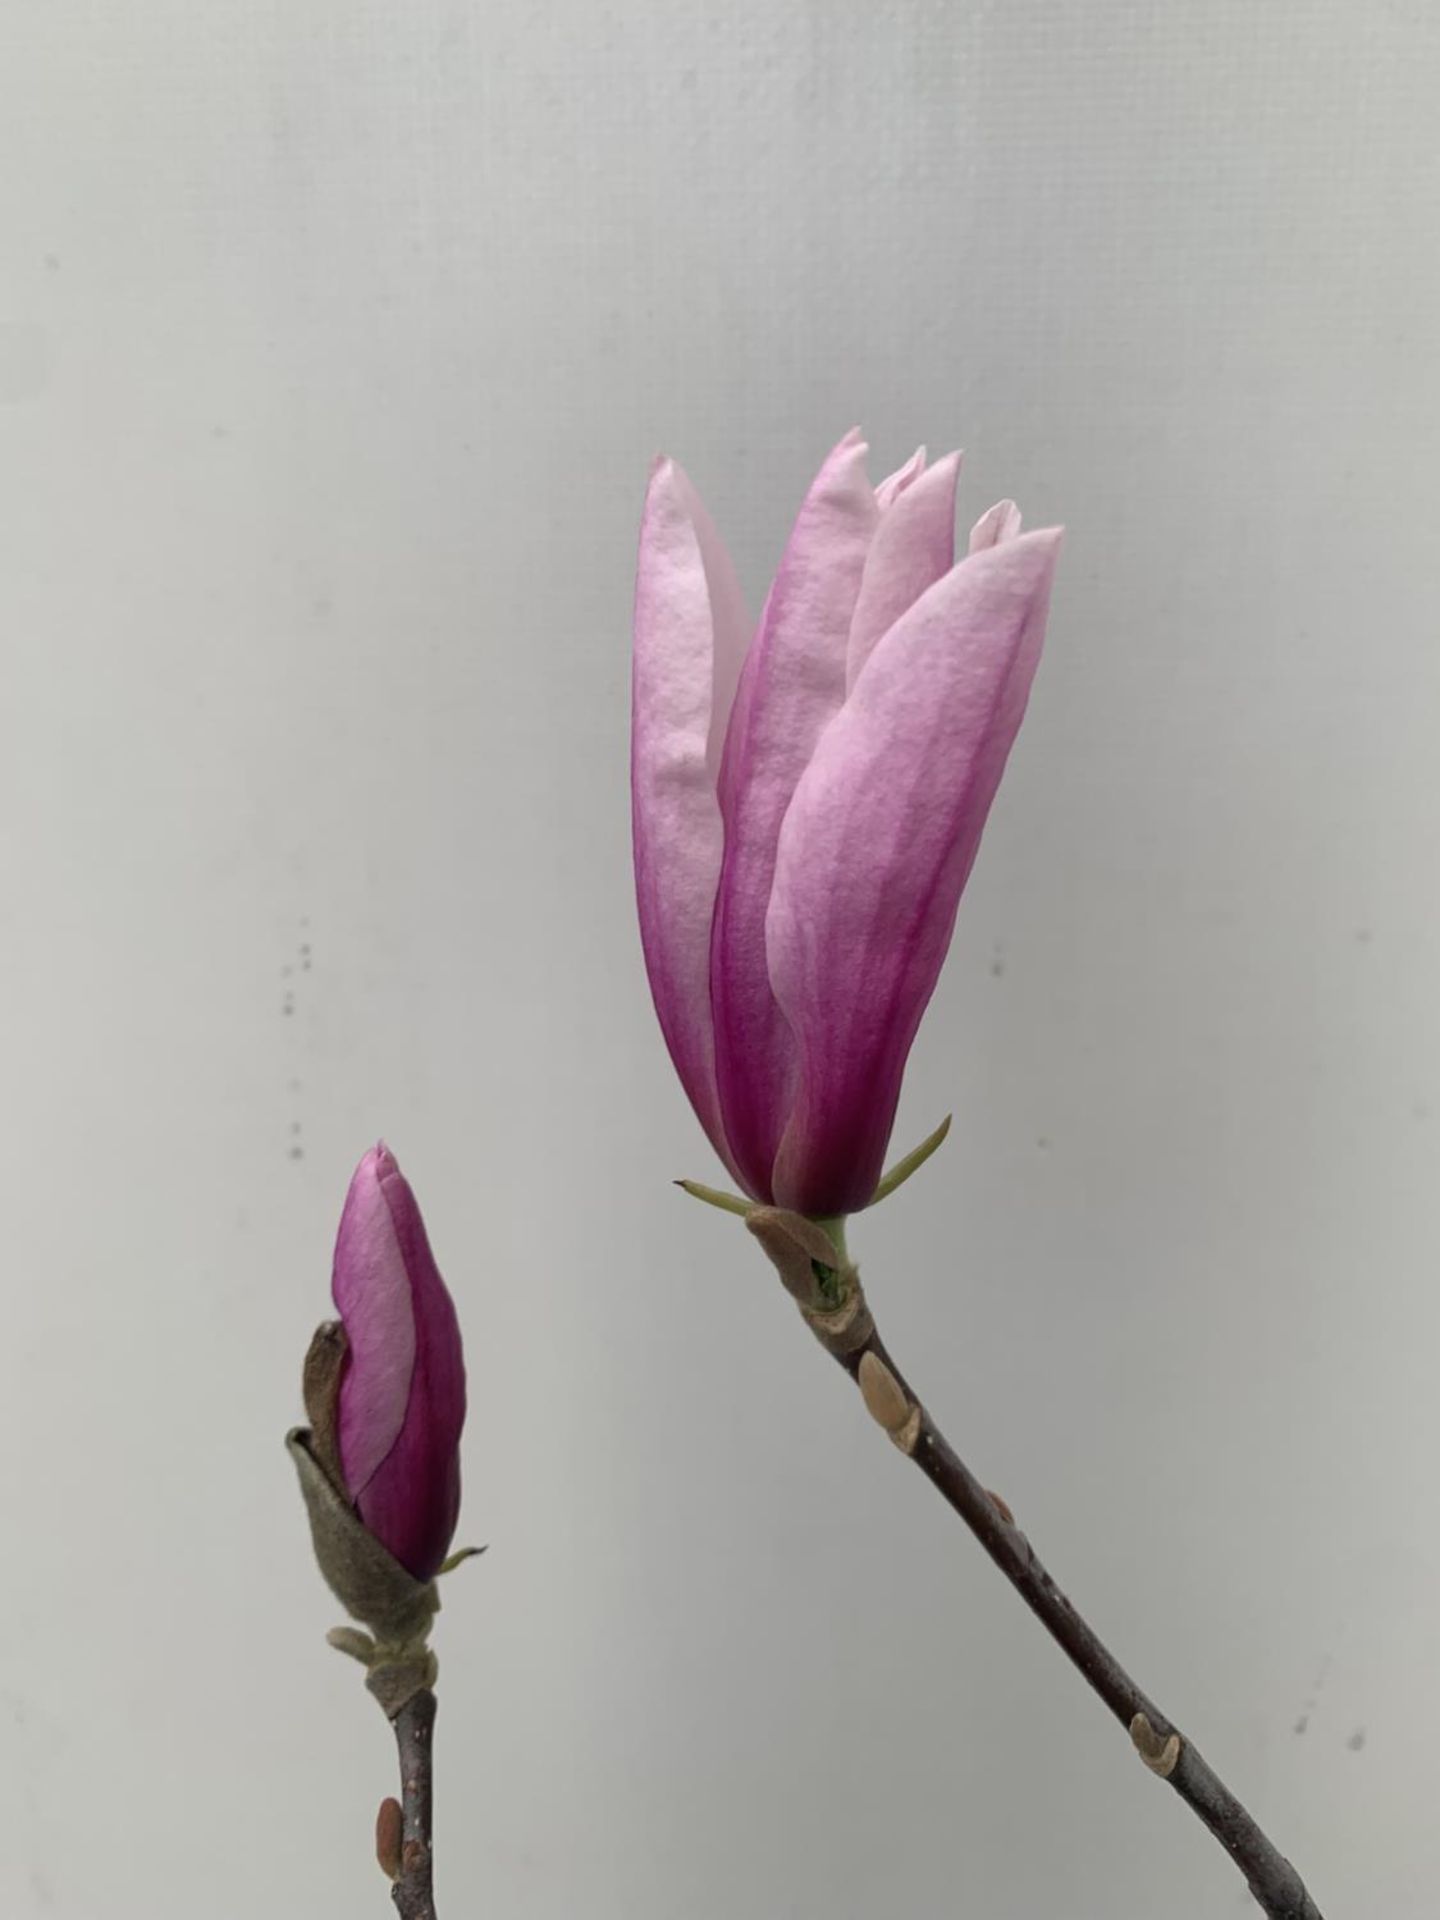 ONE MAGNOLIA PINK 'BETTY' APPROX 120CM IN HEIGHT IN 7 LTR POT PLUS VAT - Image 6 of 12